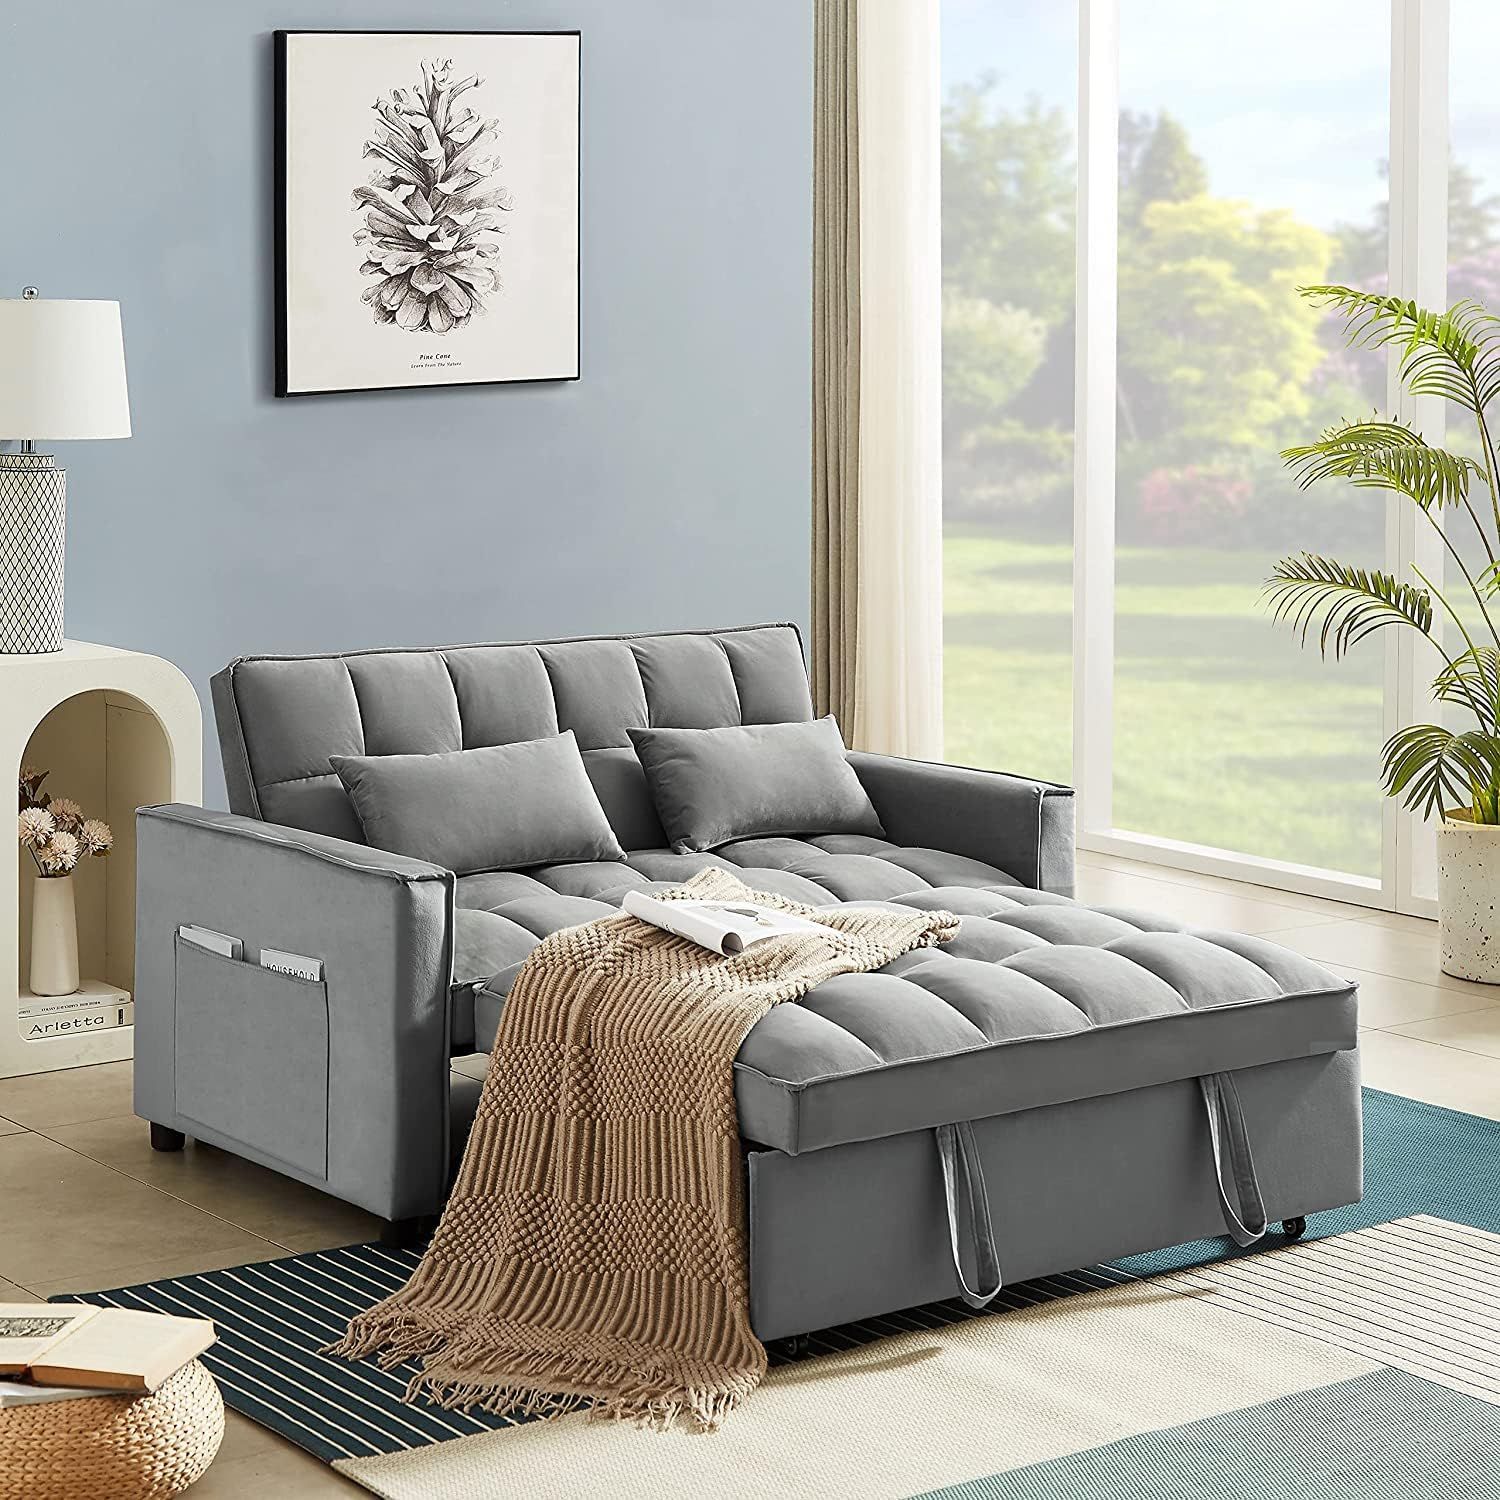 Modern Convertible Sofa Bed With Adjustable Backrest India | Ubuy In Adjustable Backrest Futon Sofa Beds (View 7 of 15)